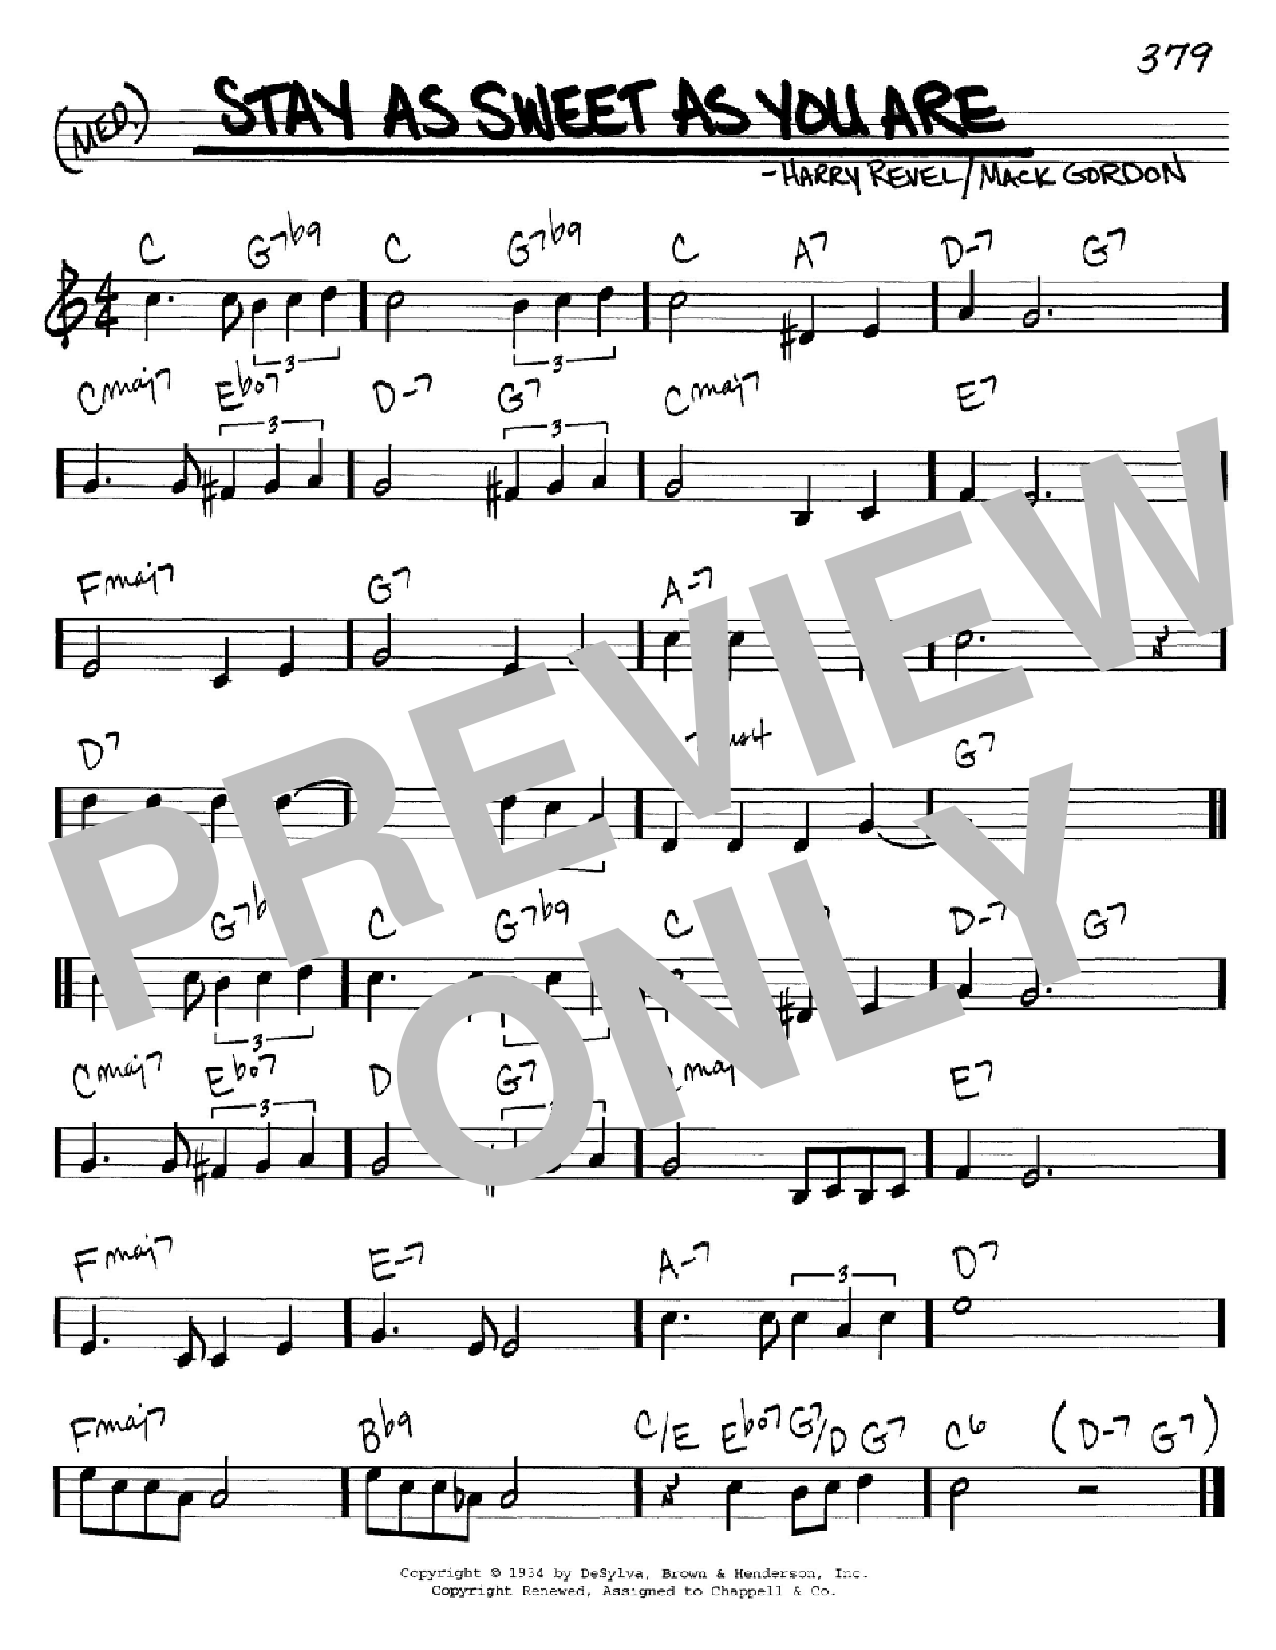 Download Mack Gordon Stay As Sweet As You Are Sheet Music